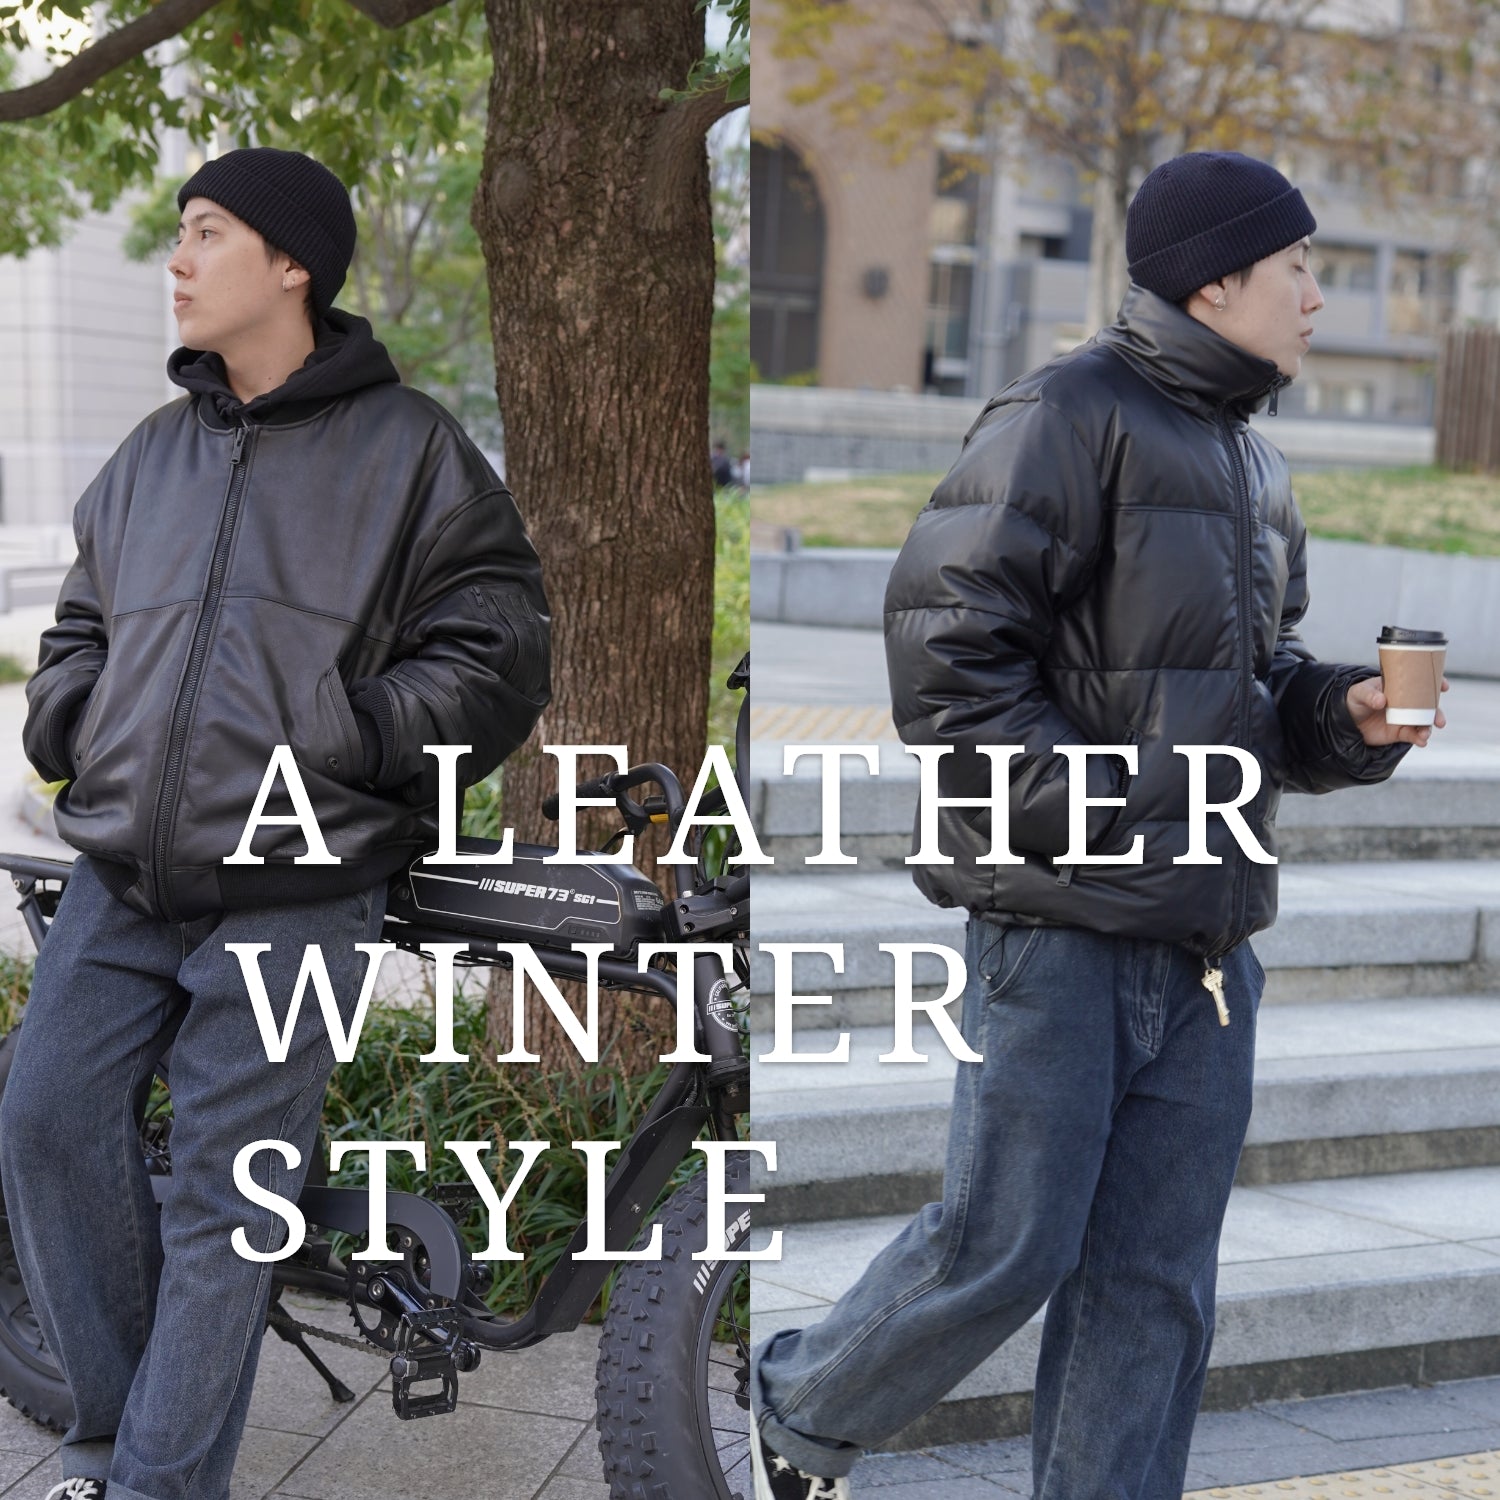 A LEATHER WINTER STYLE